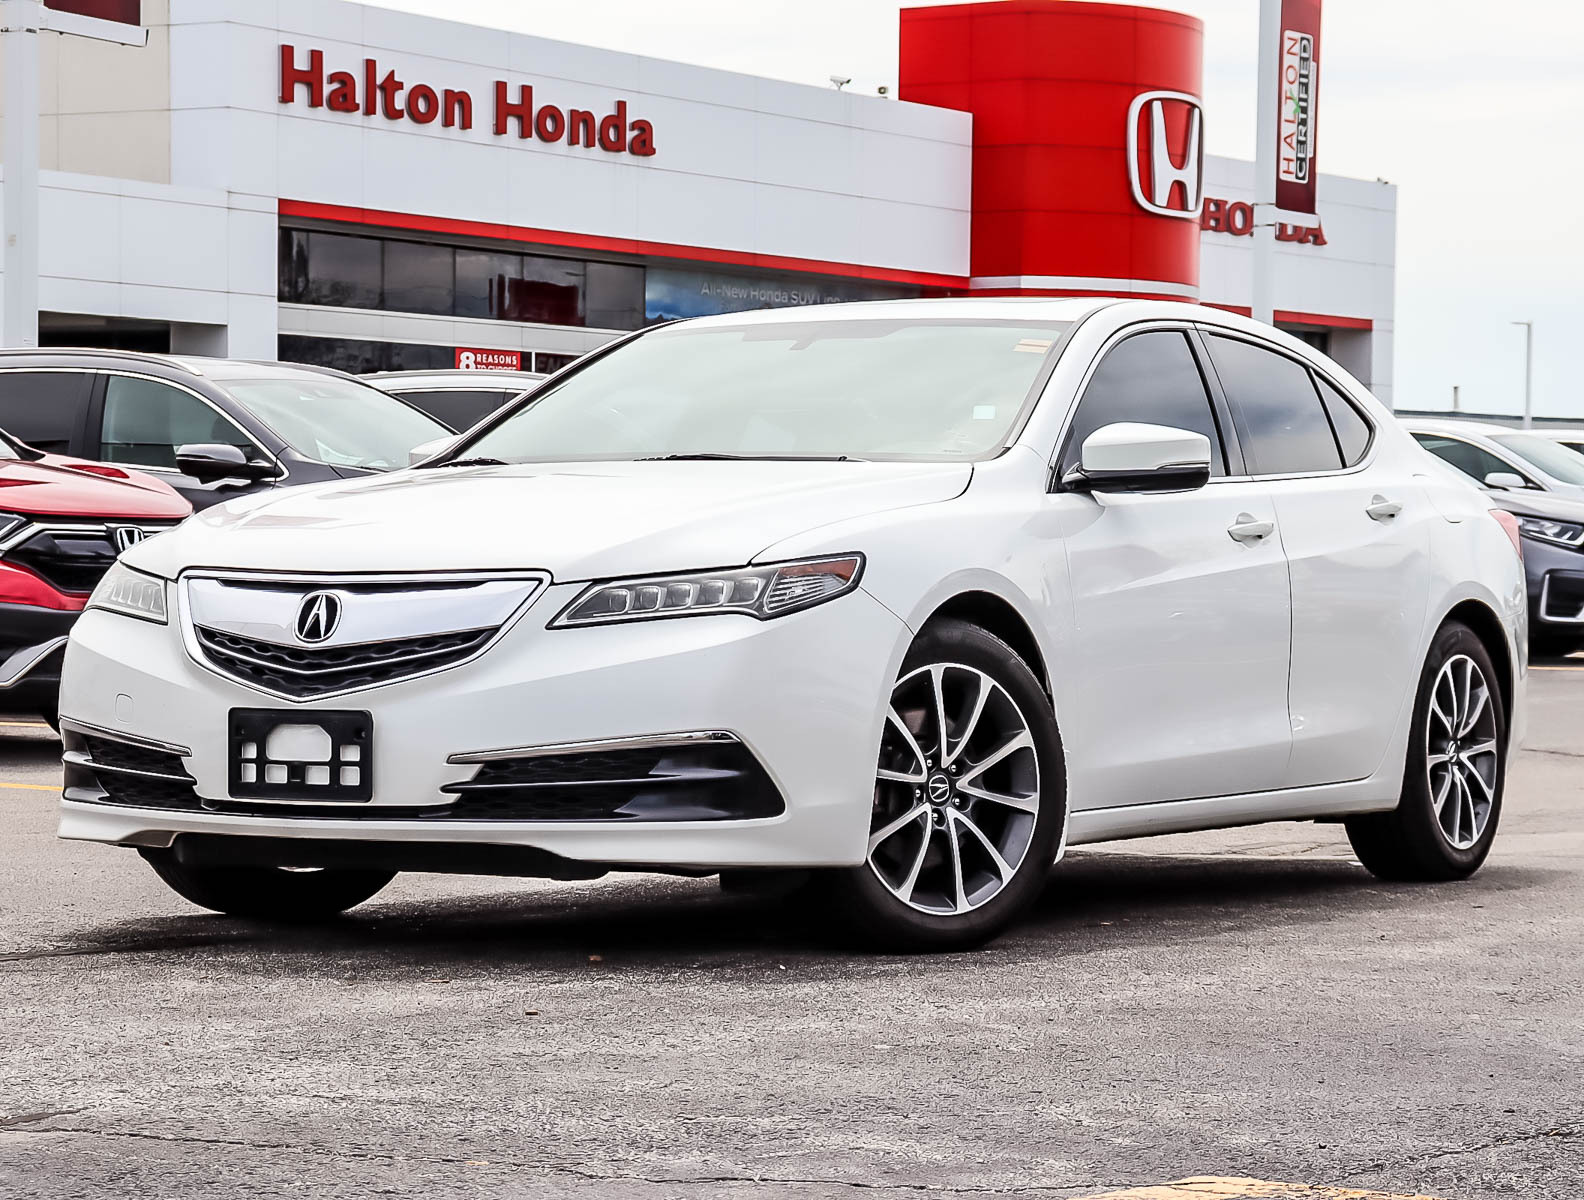 2016 Acura TLX SH-AWD  w/ TECHNOLOGY PACKAGE  |  POWER MOONROOF  